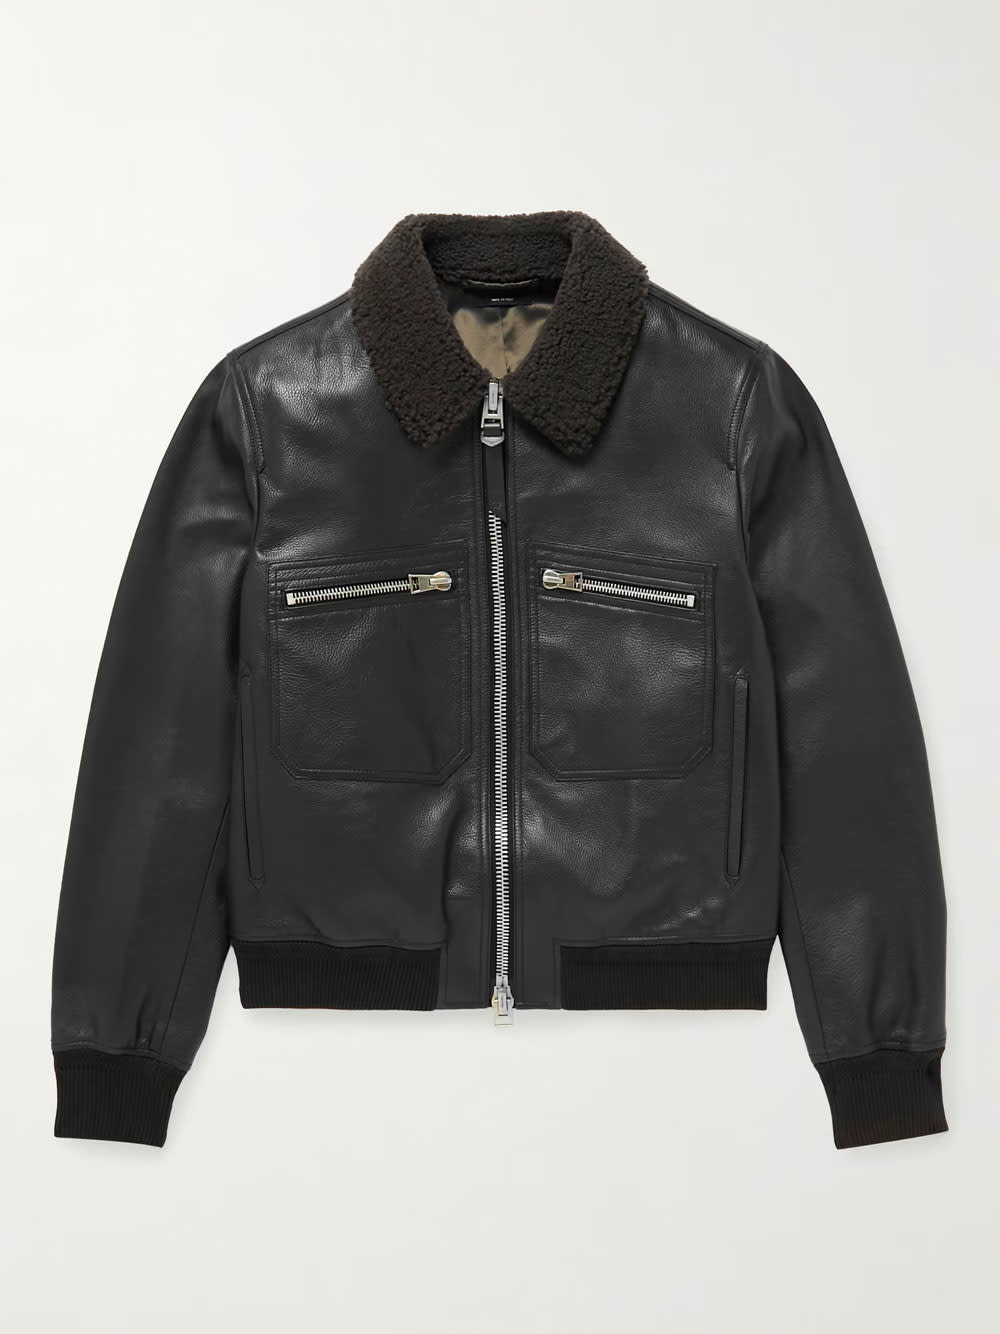 tom ford shearling leather jackets for men